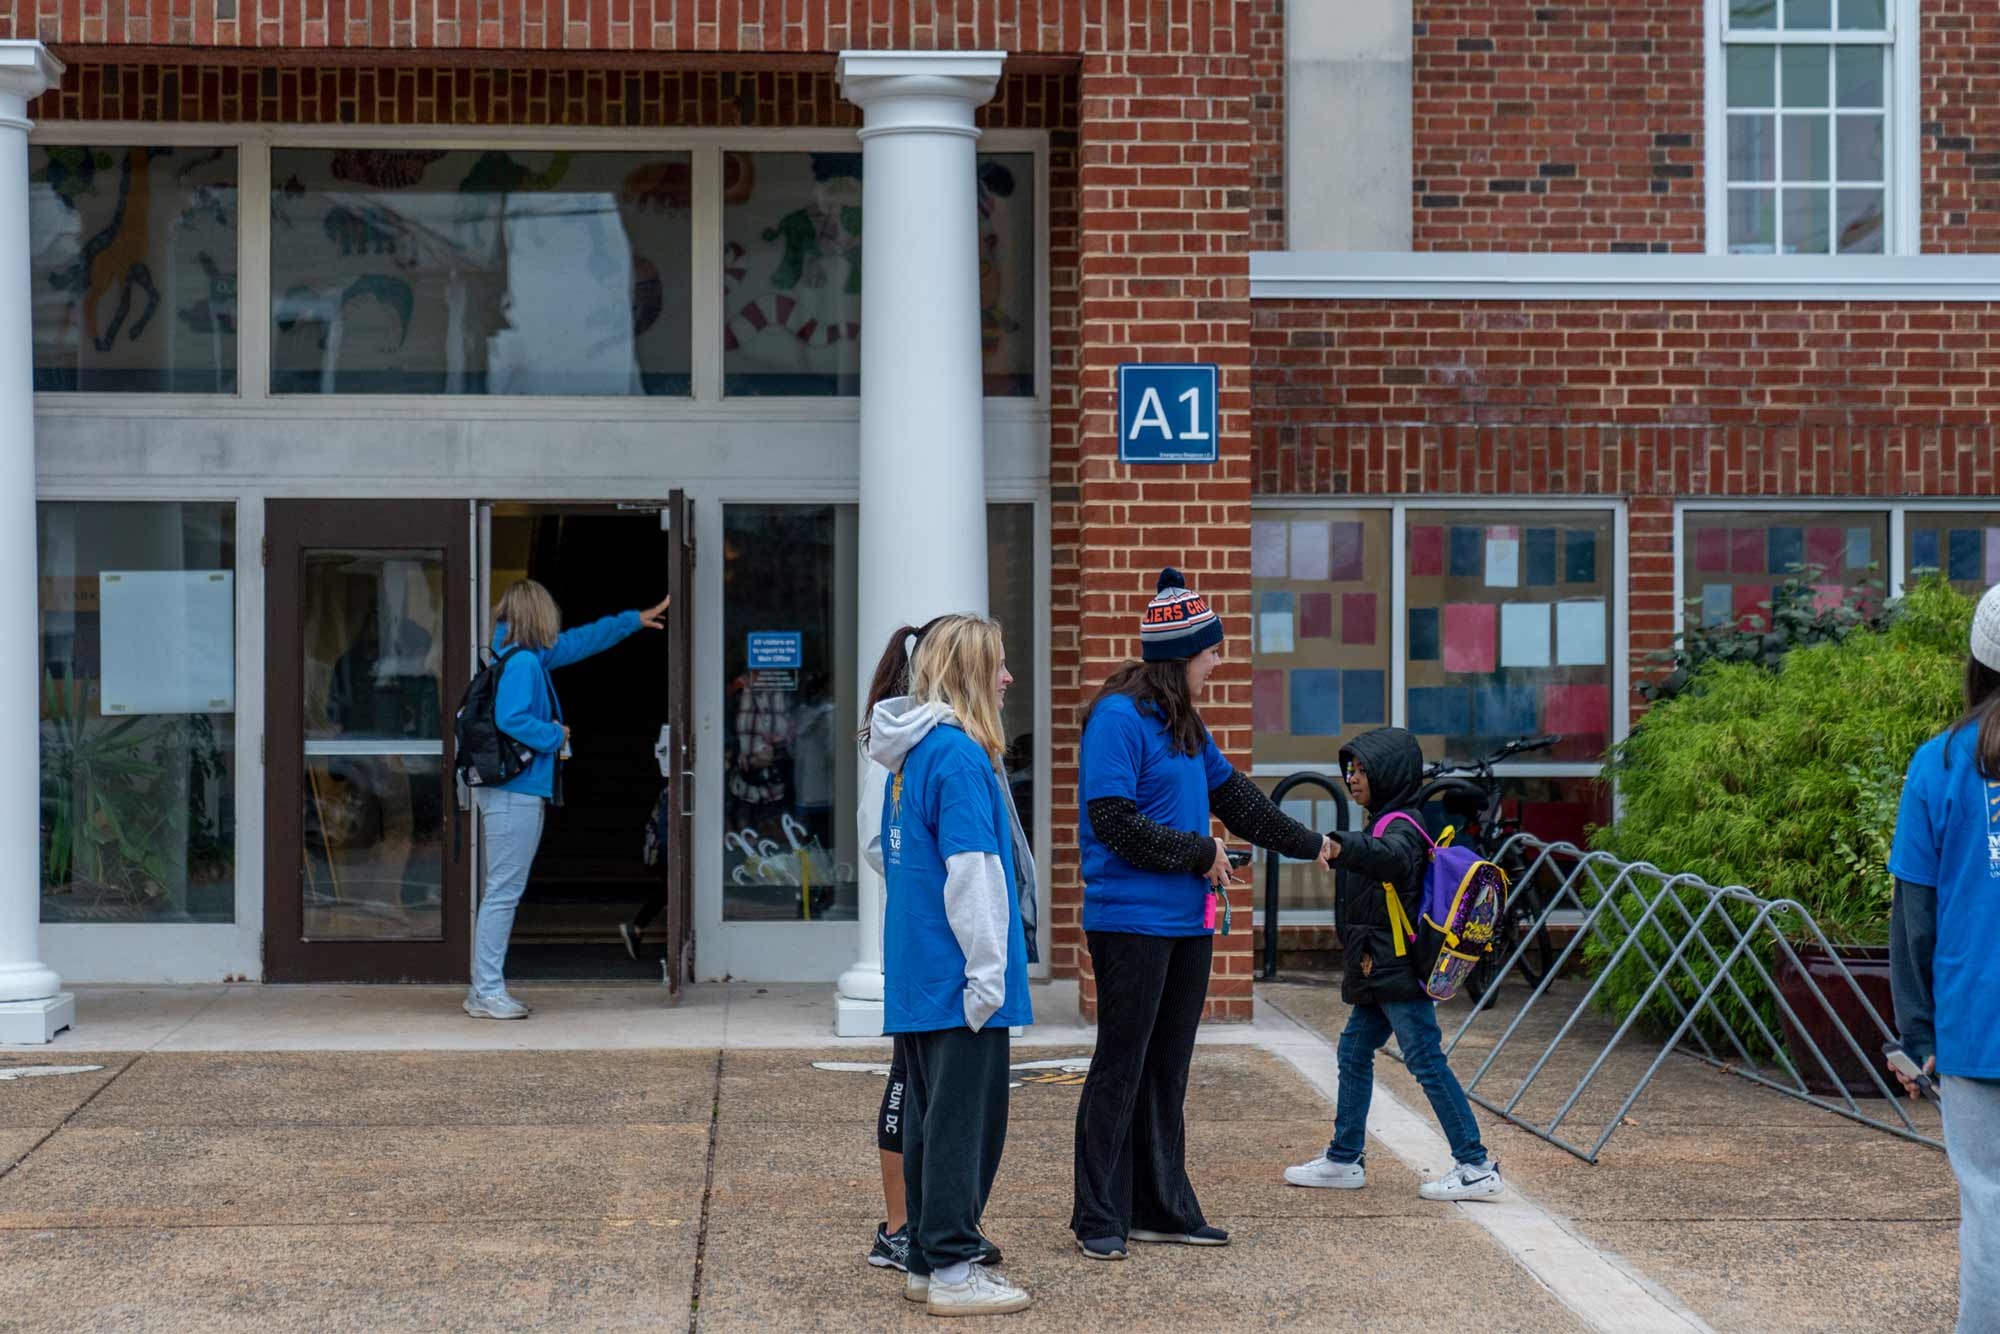 UVA students greeting elementary students outside of a building